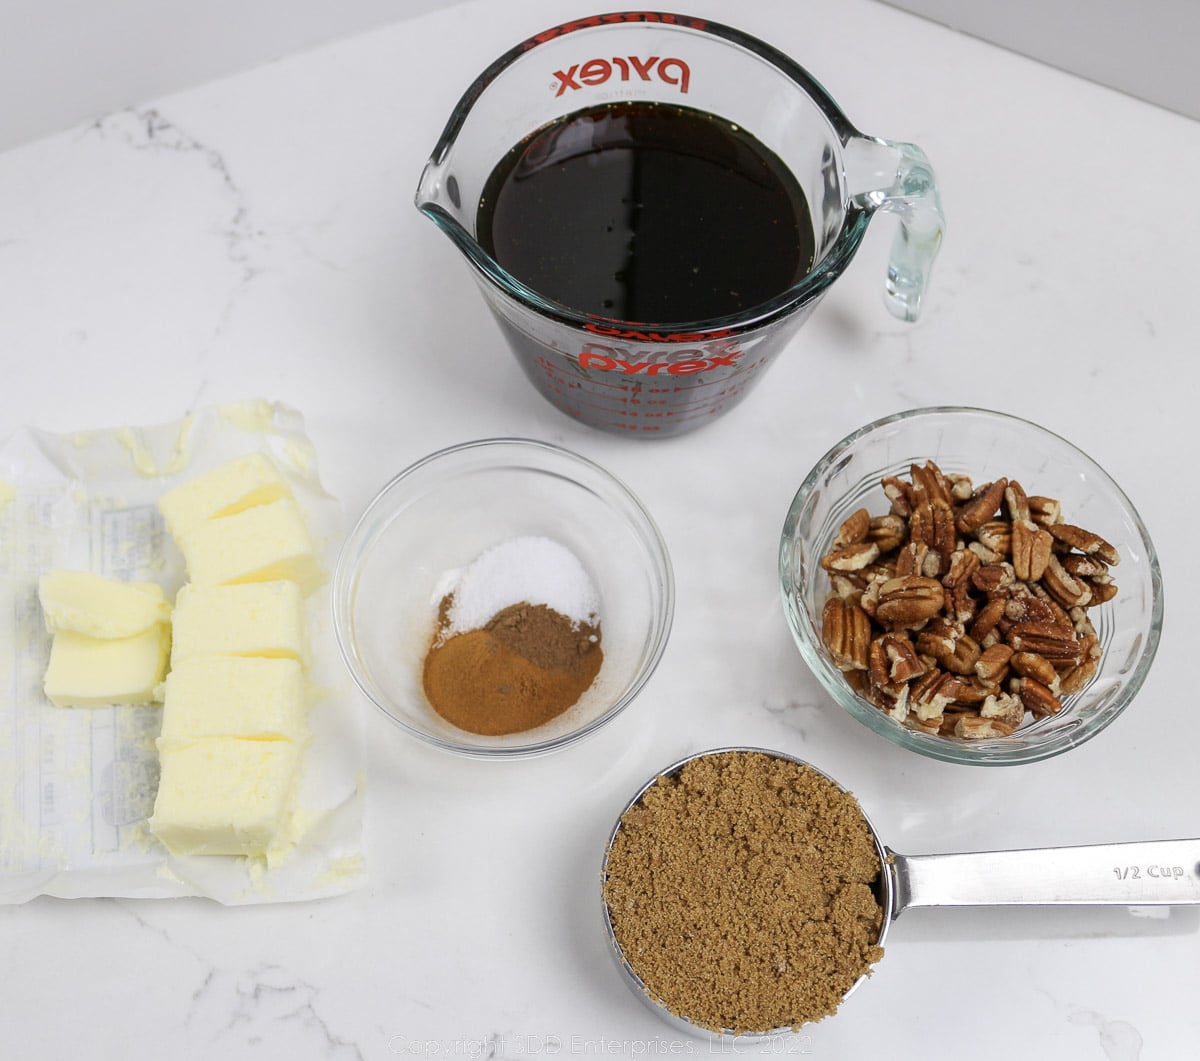 prepared ingredients for cane syrup sauce